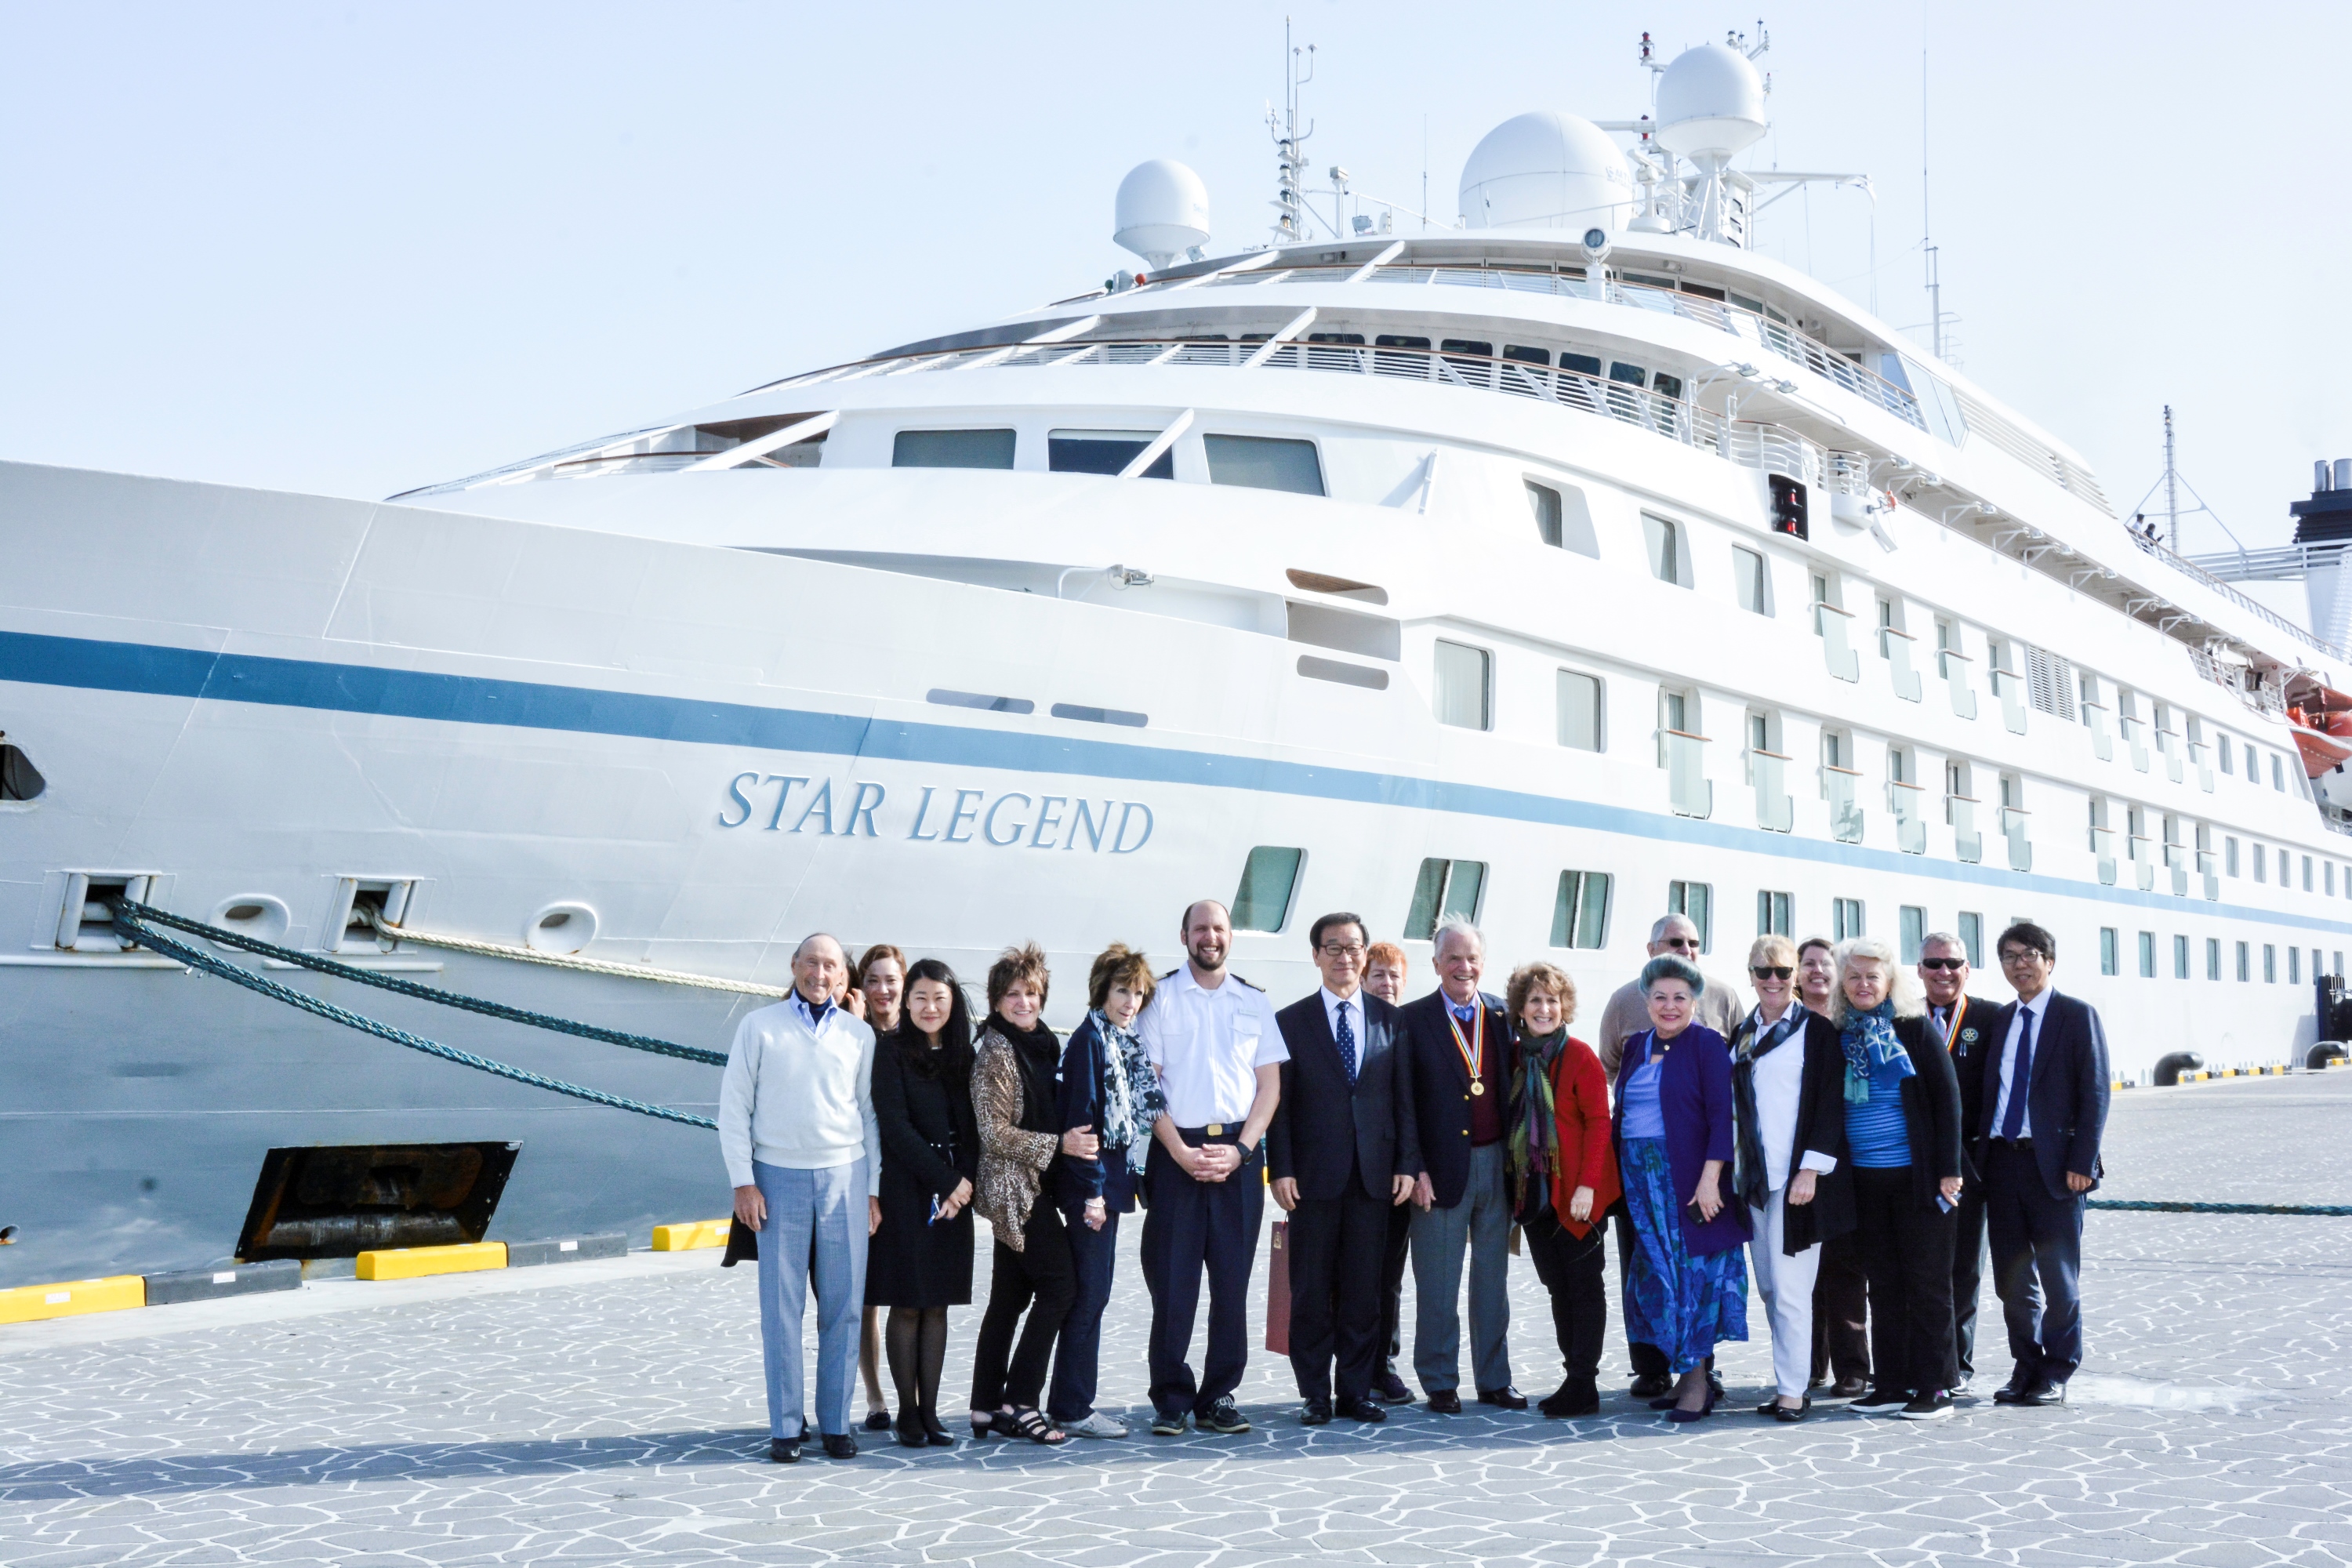 The Korean government delegation enjoyed a reception aboard Windstar’s Star Legend von her maiden call to the Port of Busan; the ship’s itinerary retraced SS Meredith Victory rescue voyage.